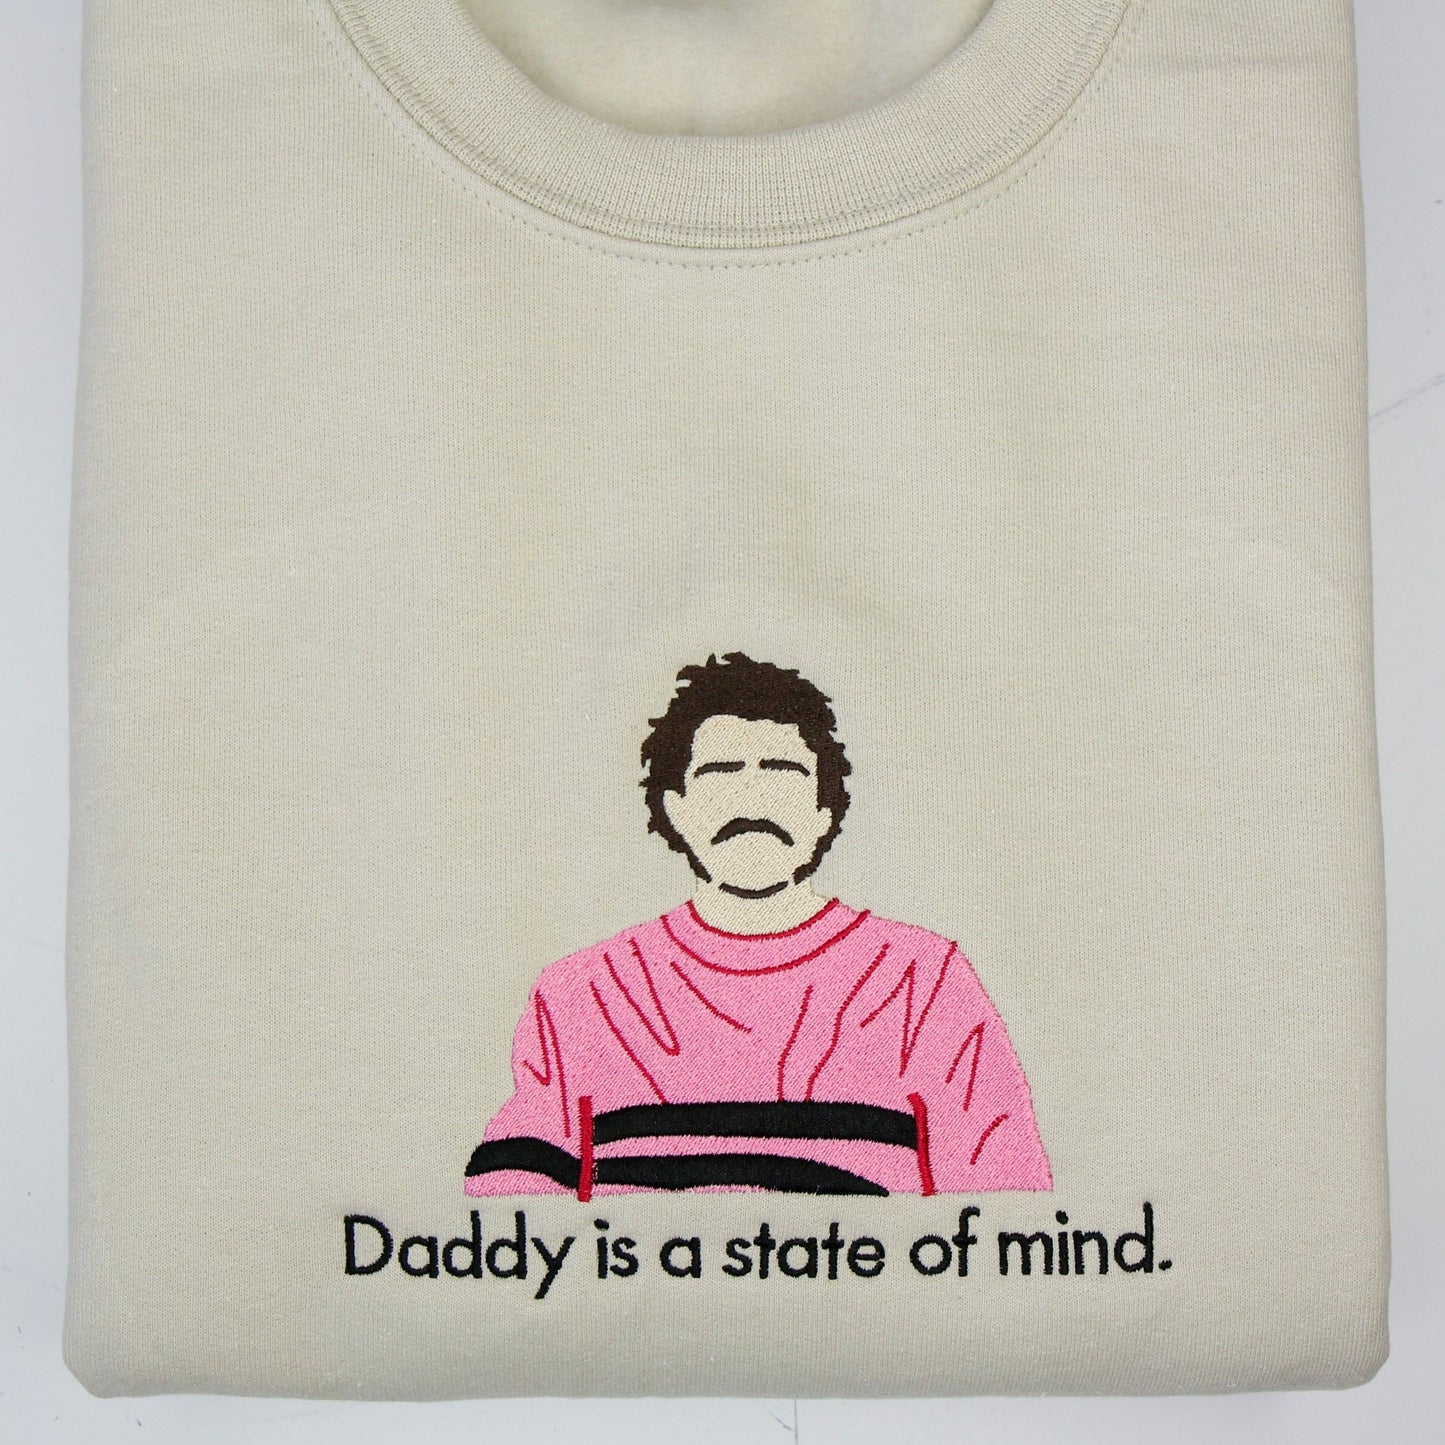 Pedro Pascal "Daddy is a state of mind" Crewneck (Sand)